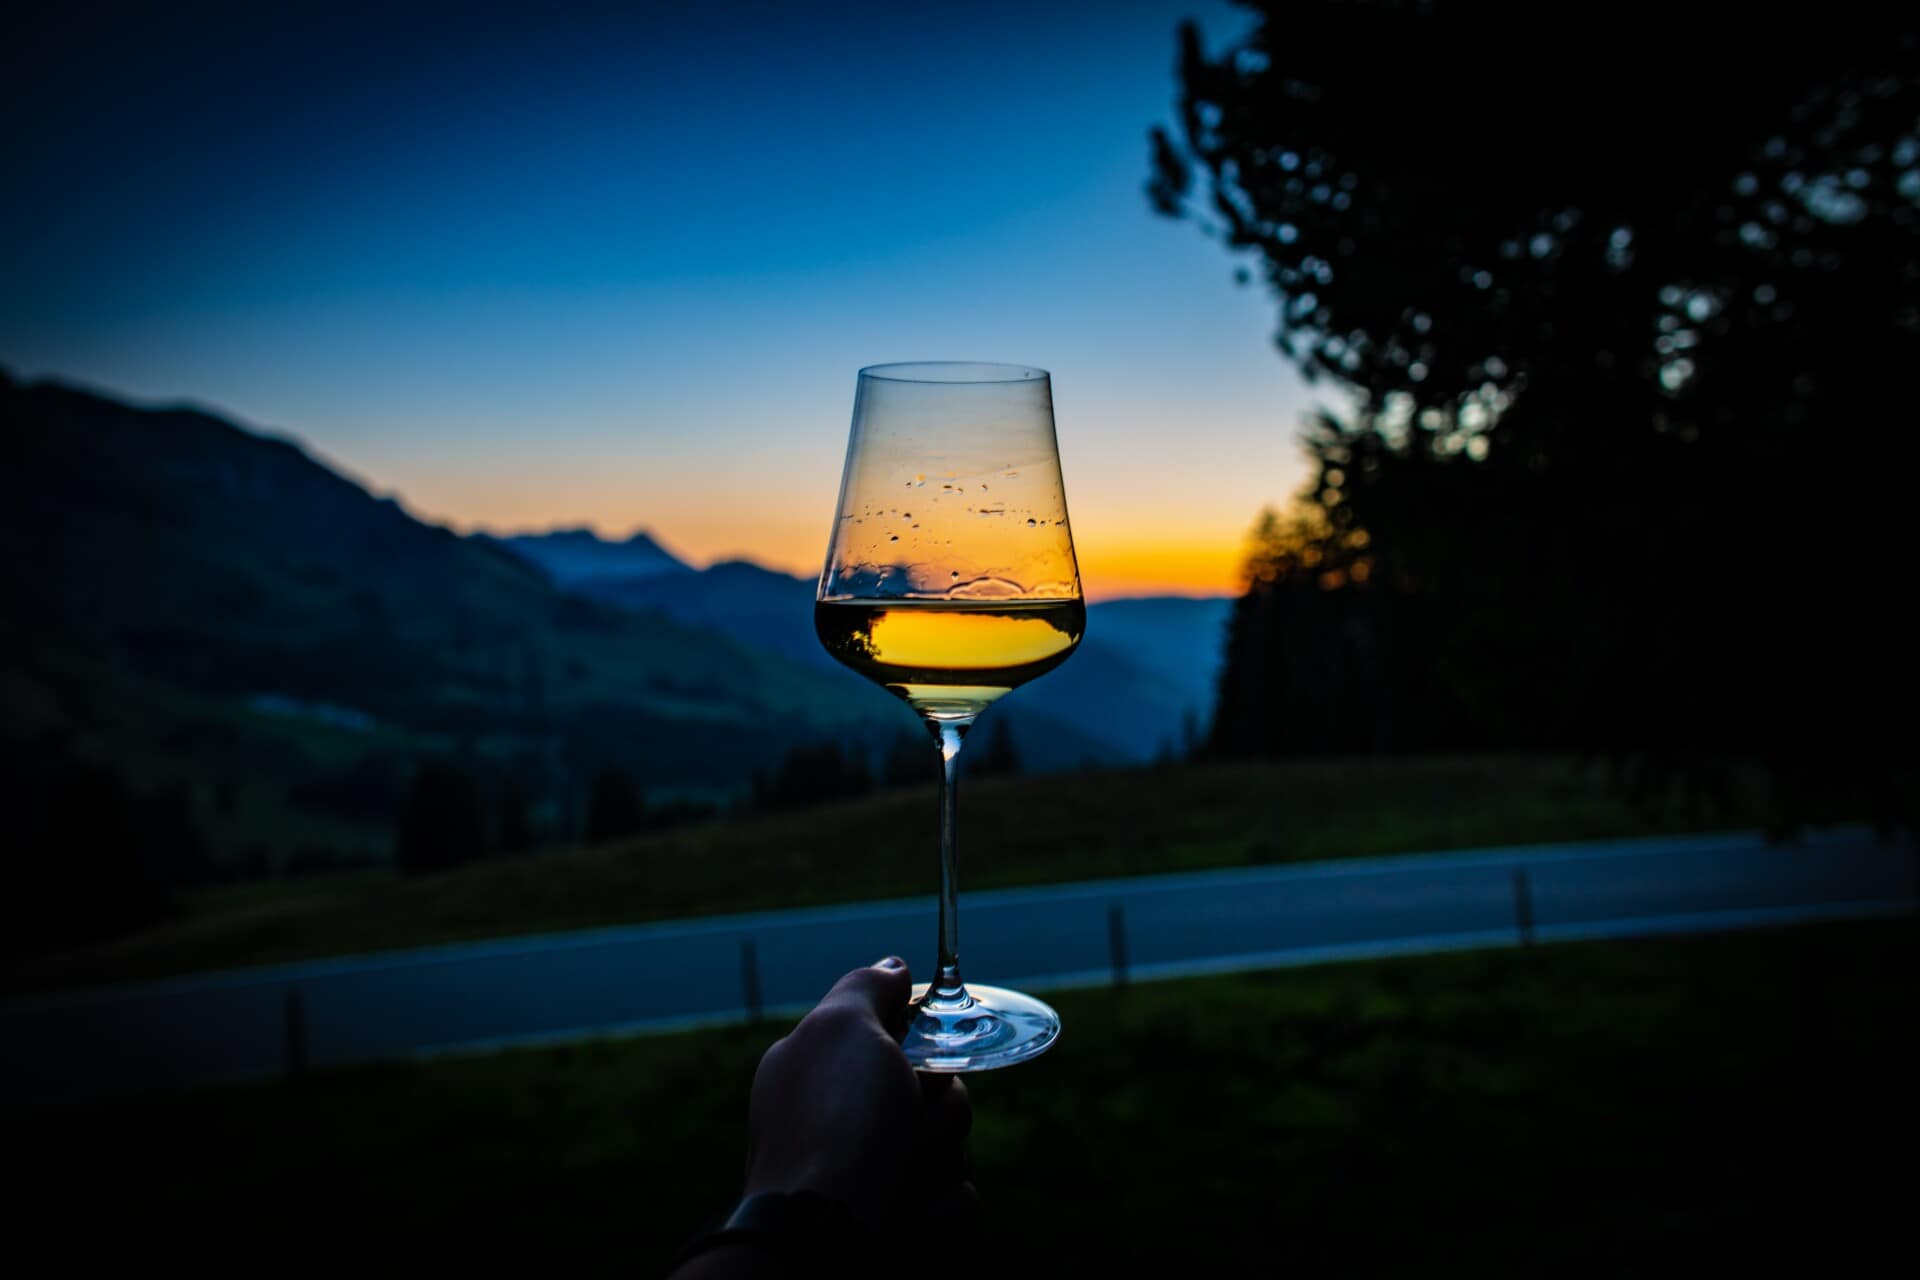 A glass of white wine held up as the sunsets